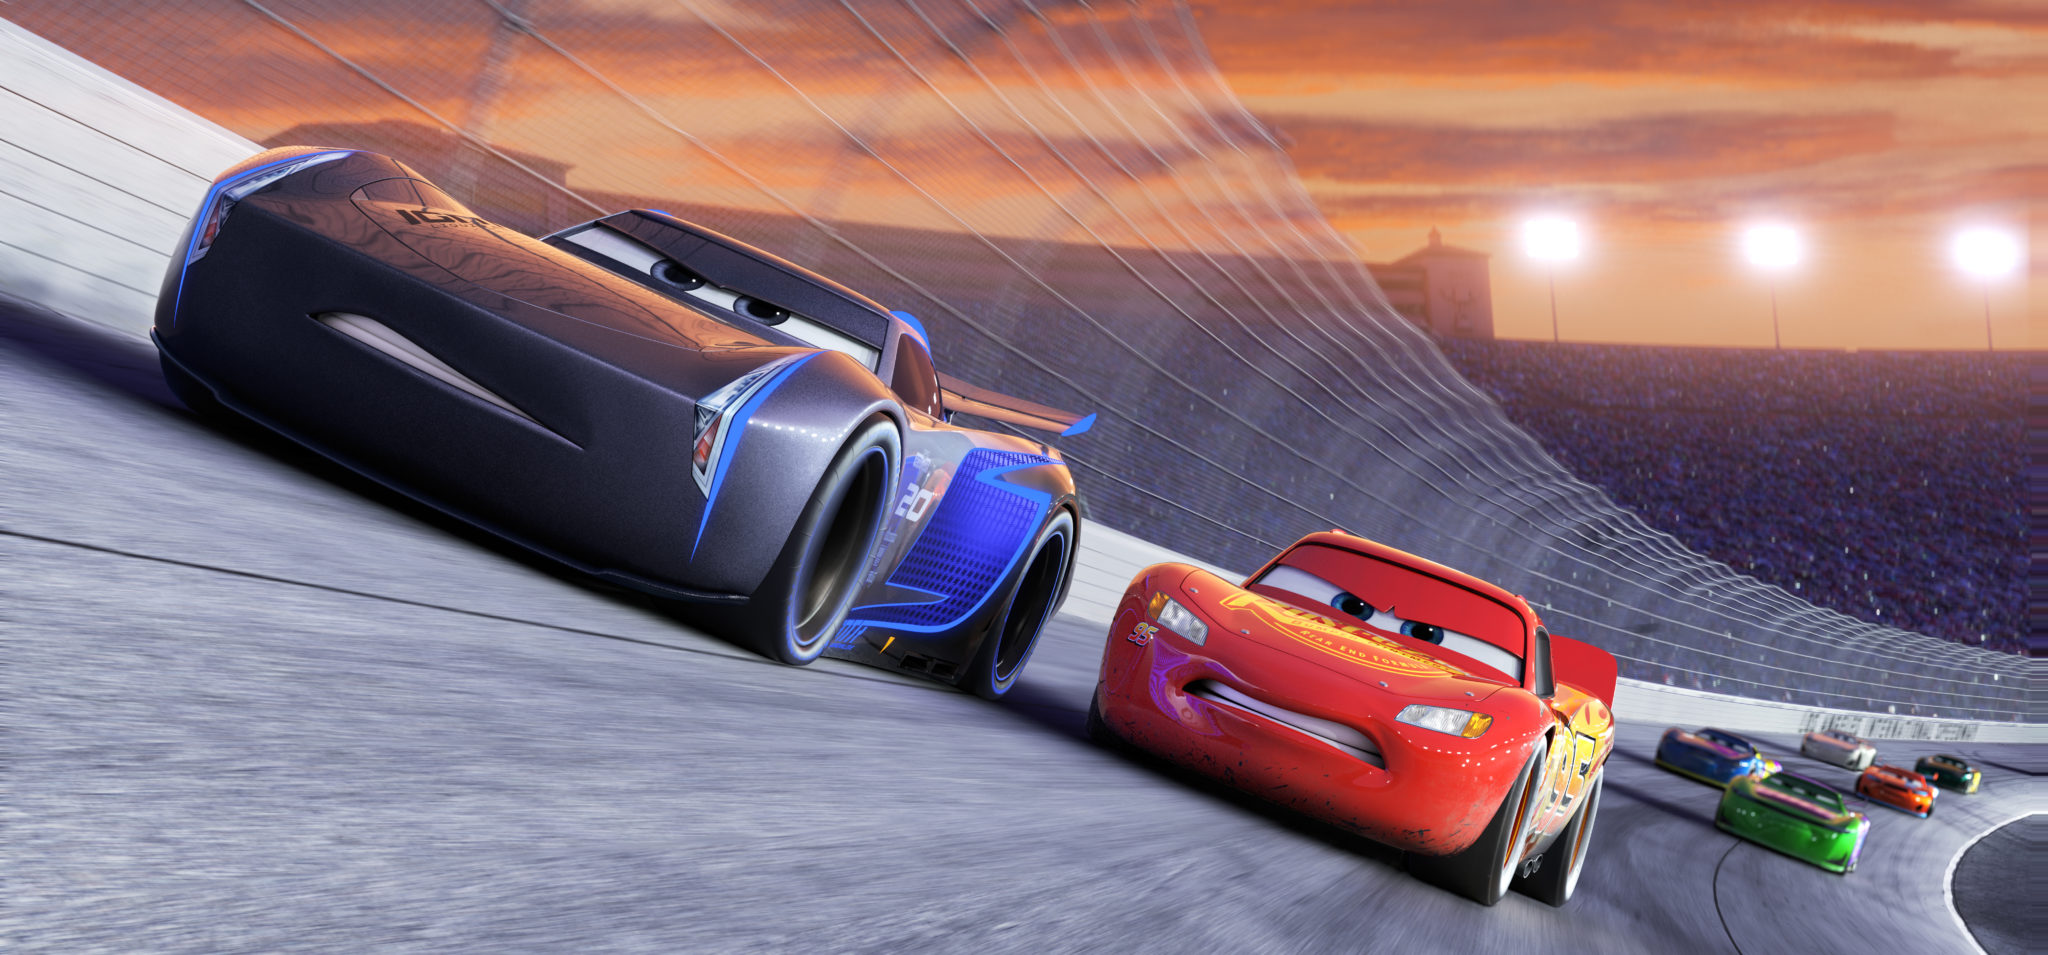 Owen Wilson, Cristela Alonzo And Armie Hammer Buckle Up For Cars 3